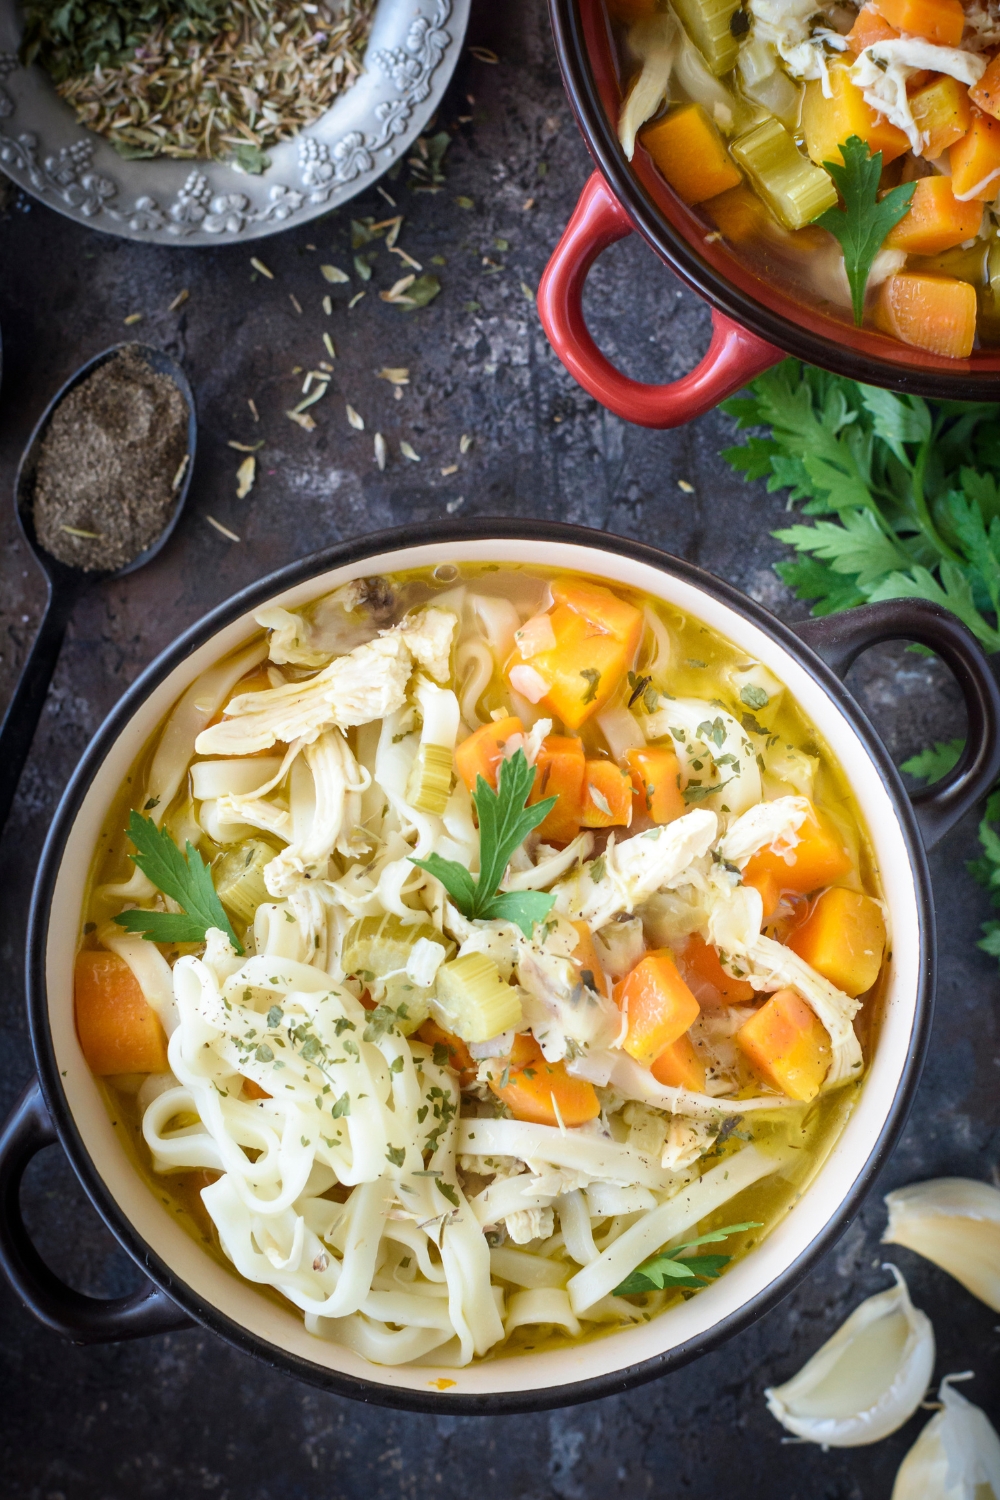 A bowl of chicken noodle soup with chunks of carrot, fresh herbs, and dried herbs sprinkled on top.